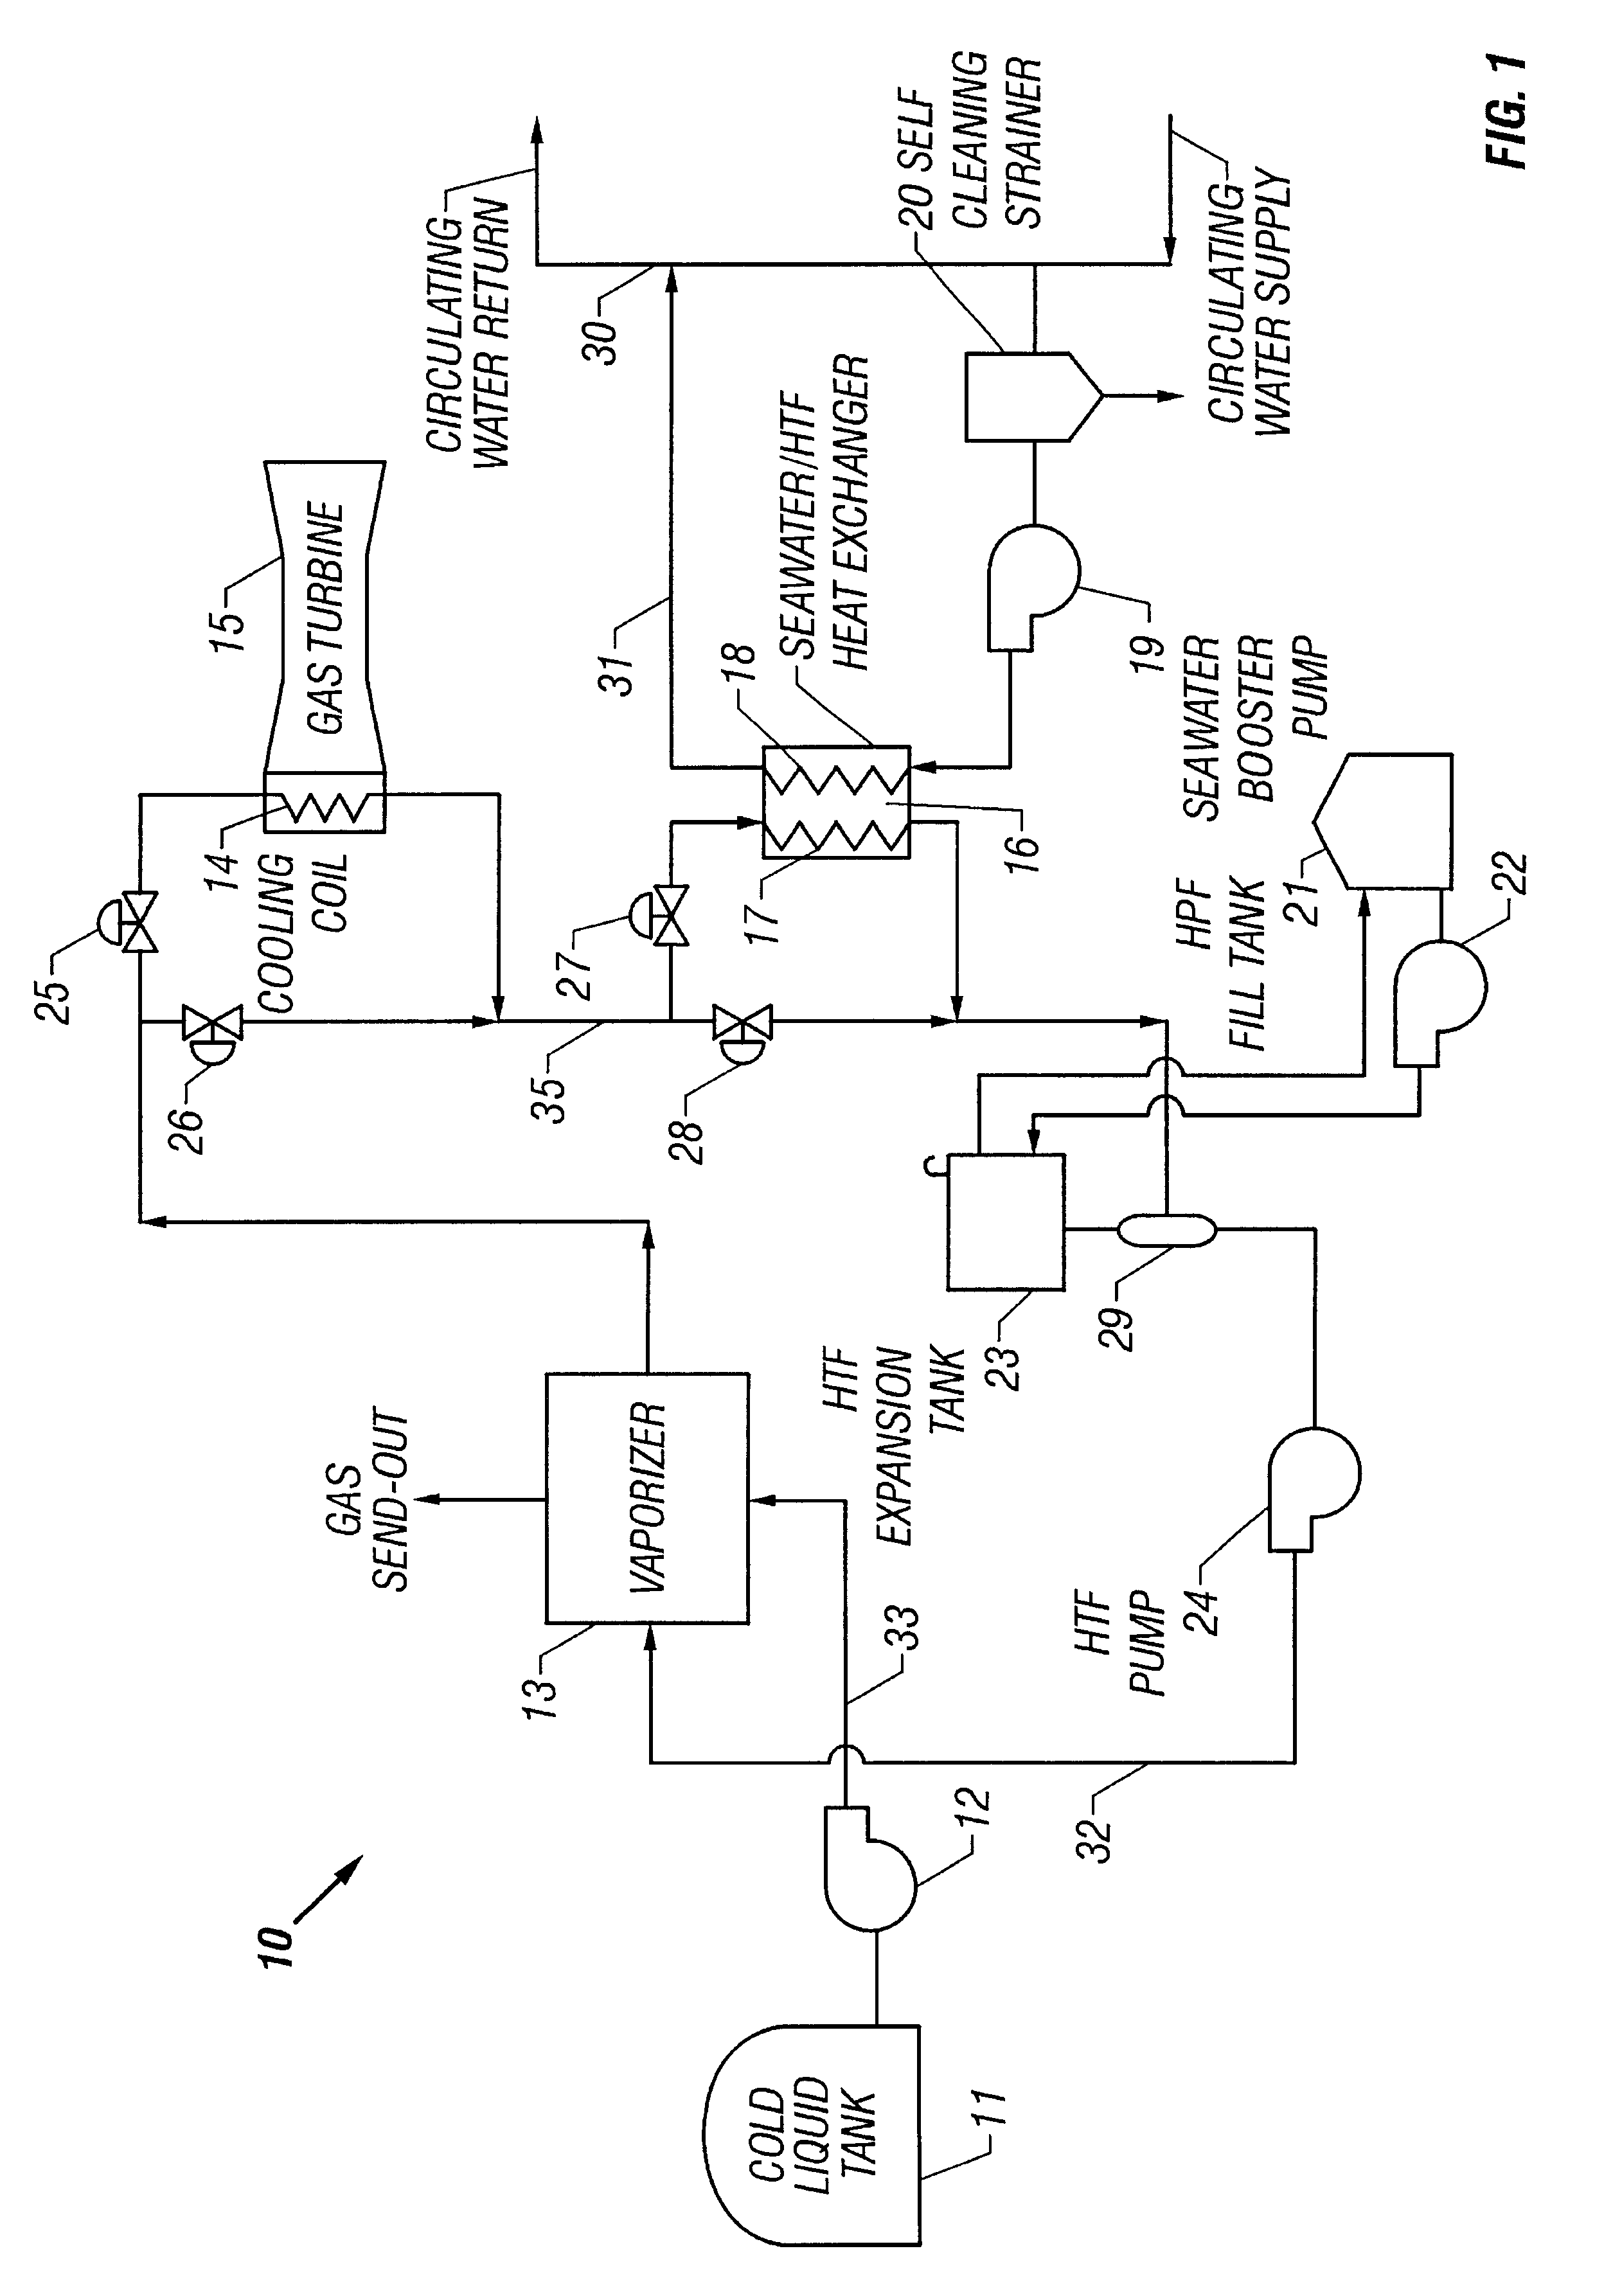 Method and apparatus for vaporizing liquid natural gas in a combined cycle power plant